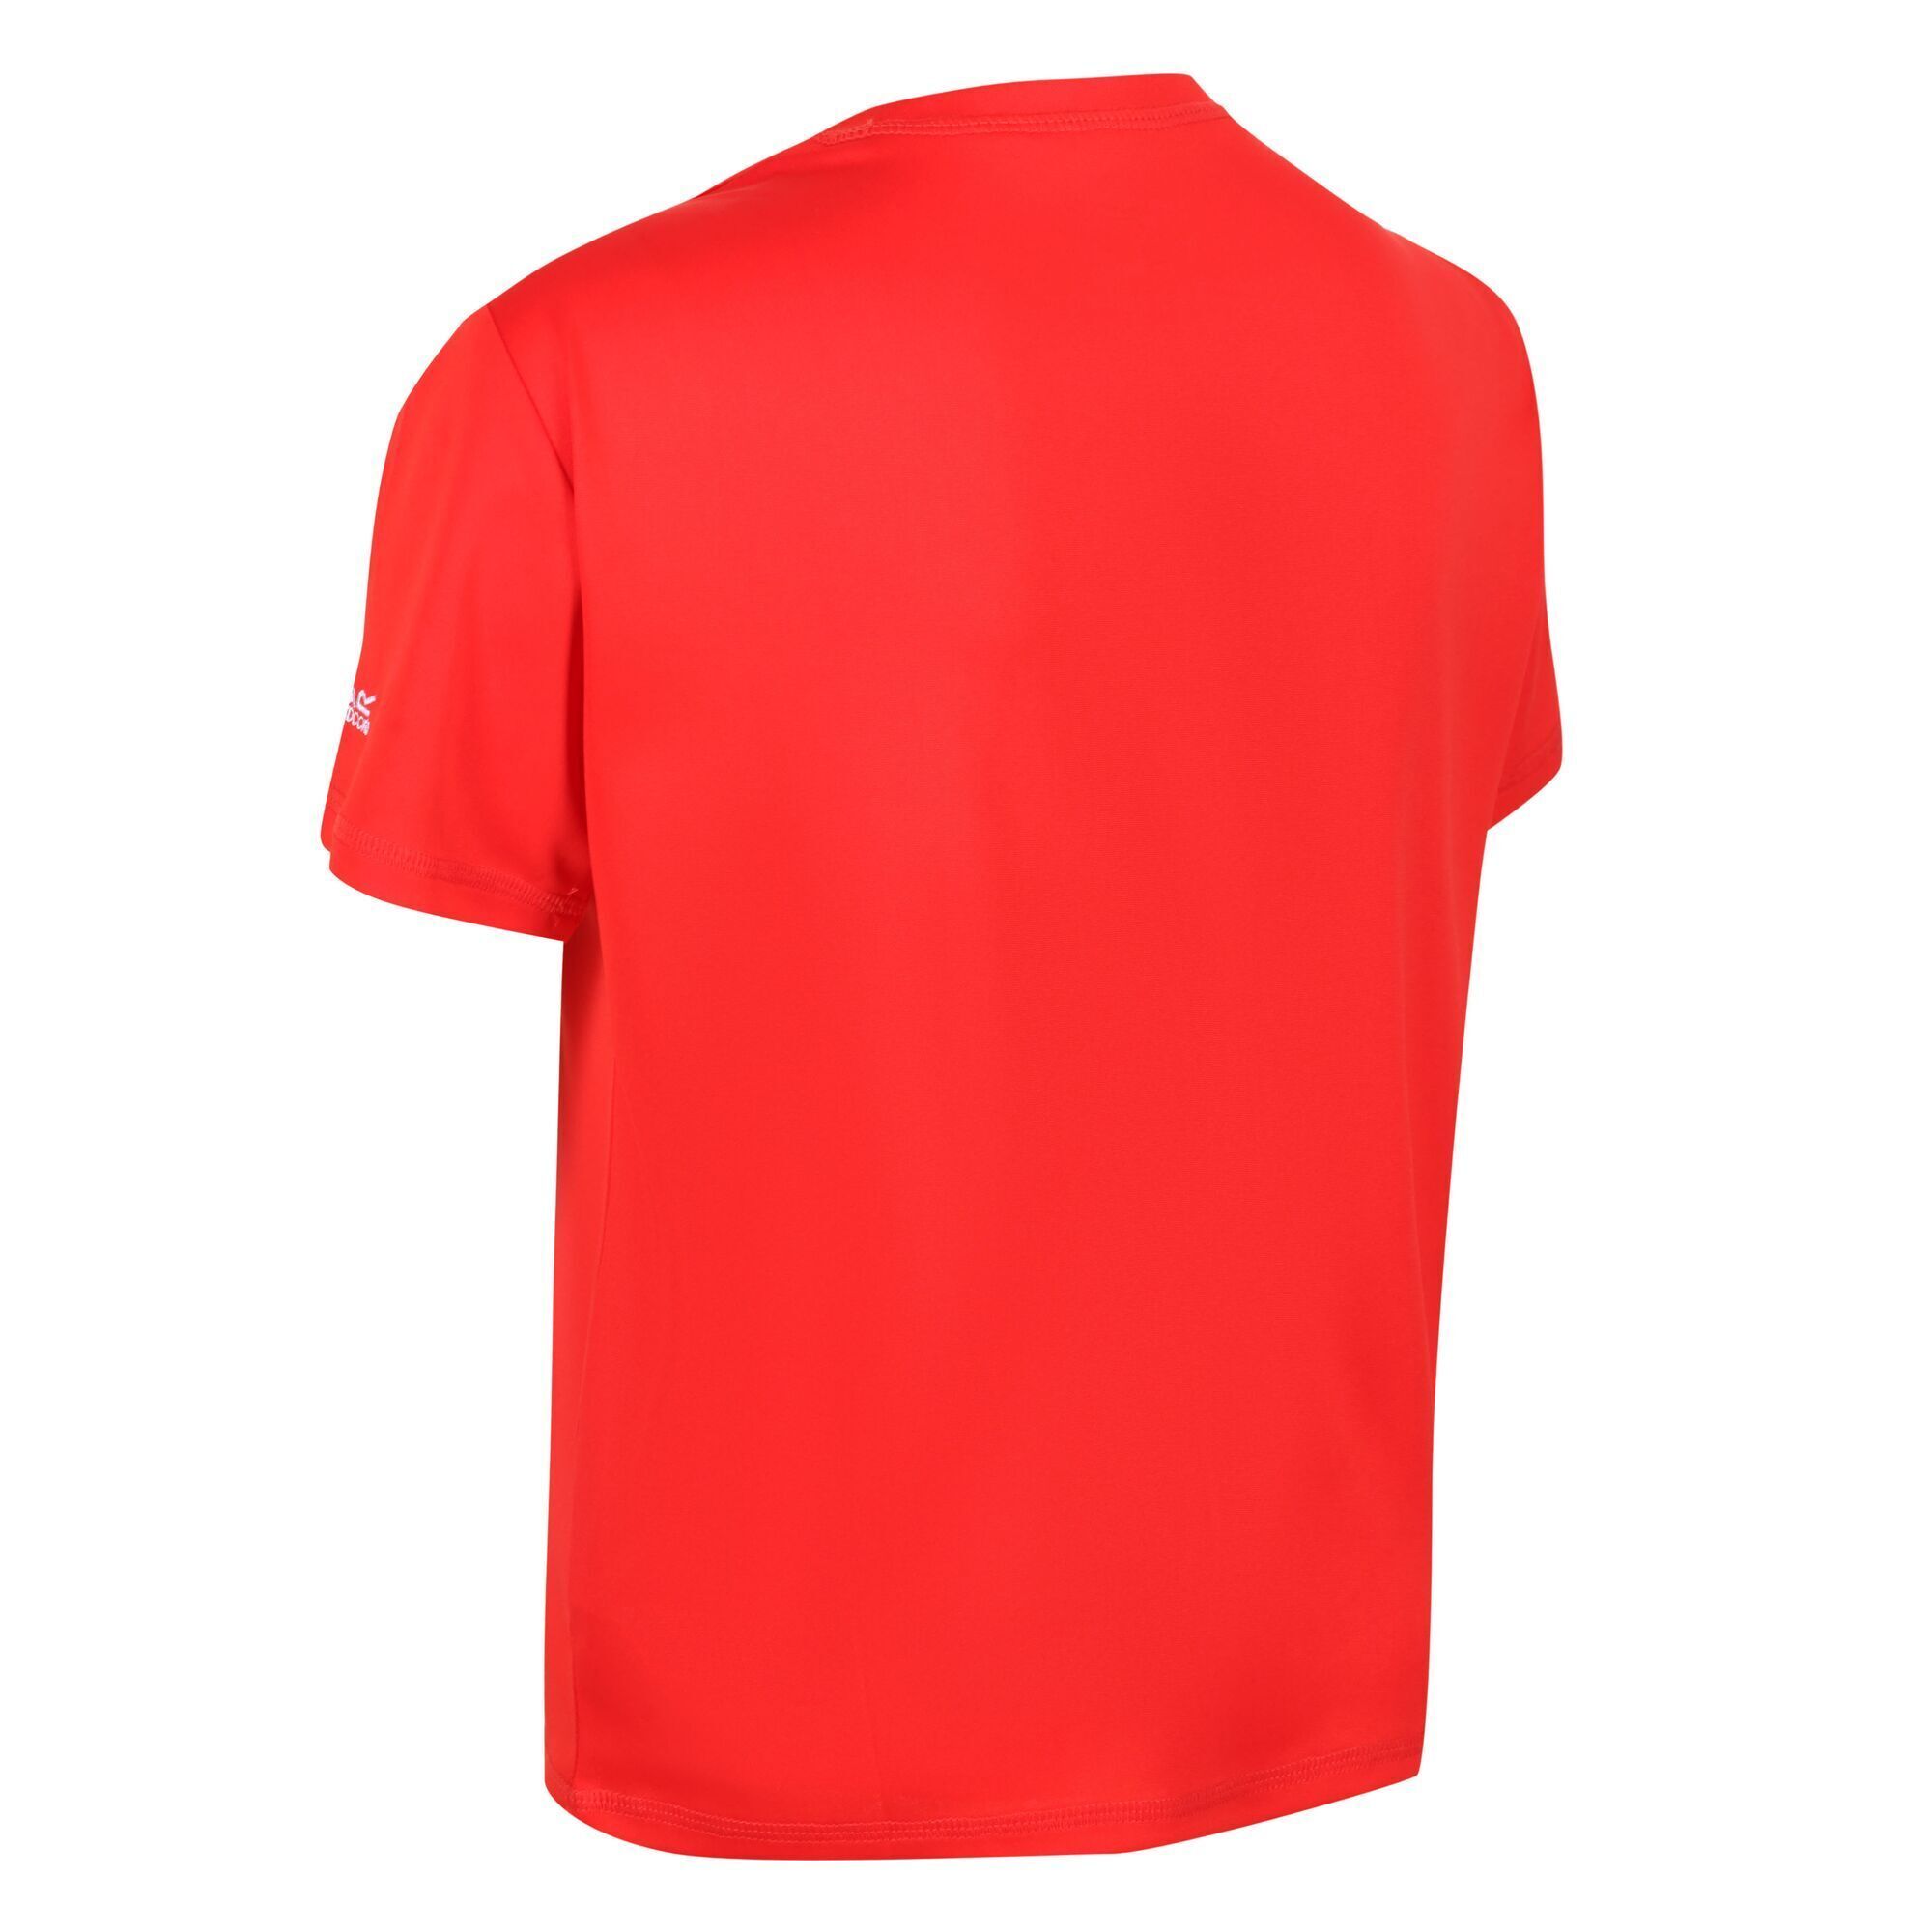 100% Polyester. Design: Circle, Logo, Mountain, Text, Triangle. Neckline: Round Neck. Sleeve-Type: Short-Sleeved. Fabric Technology: Lightweight, Moisture Wicking, Quick Dry. Sustainability: Made from Recycled Materials.